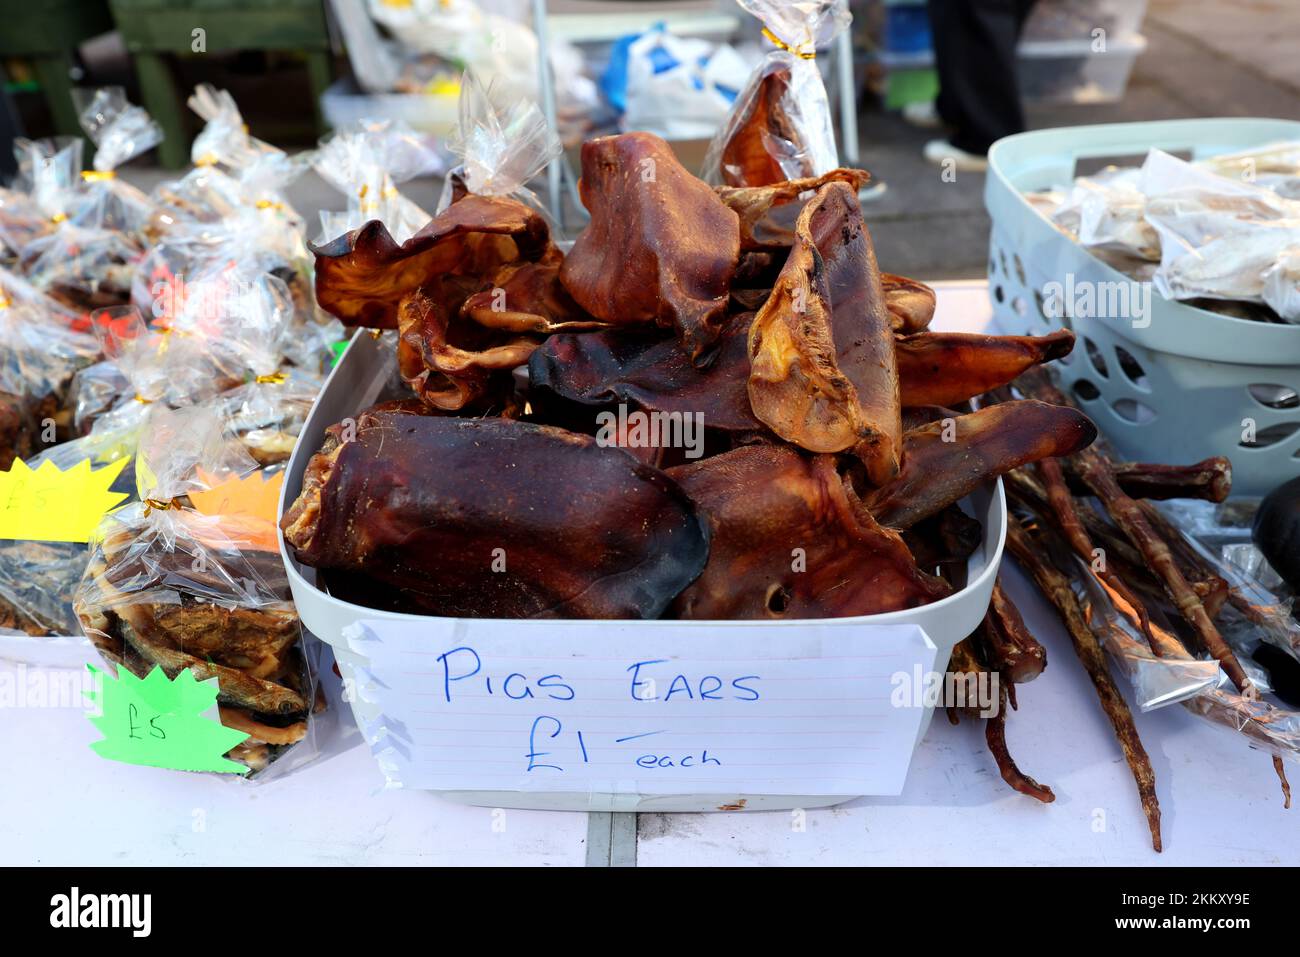 Pigs ears for sale on a market stall in Lee-on-Solent, Hampshire, UK. Stock Photo